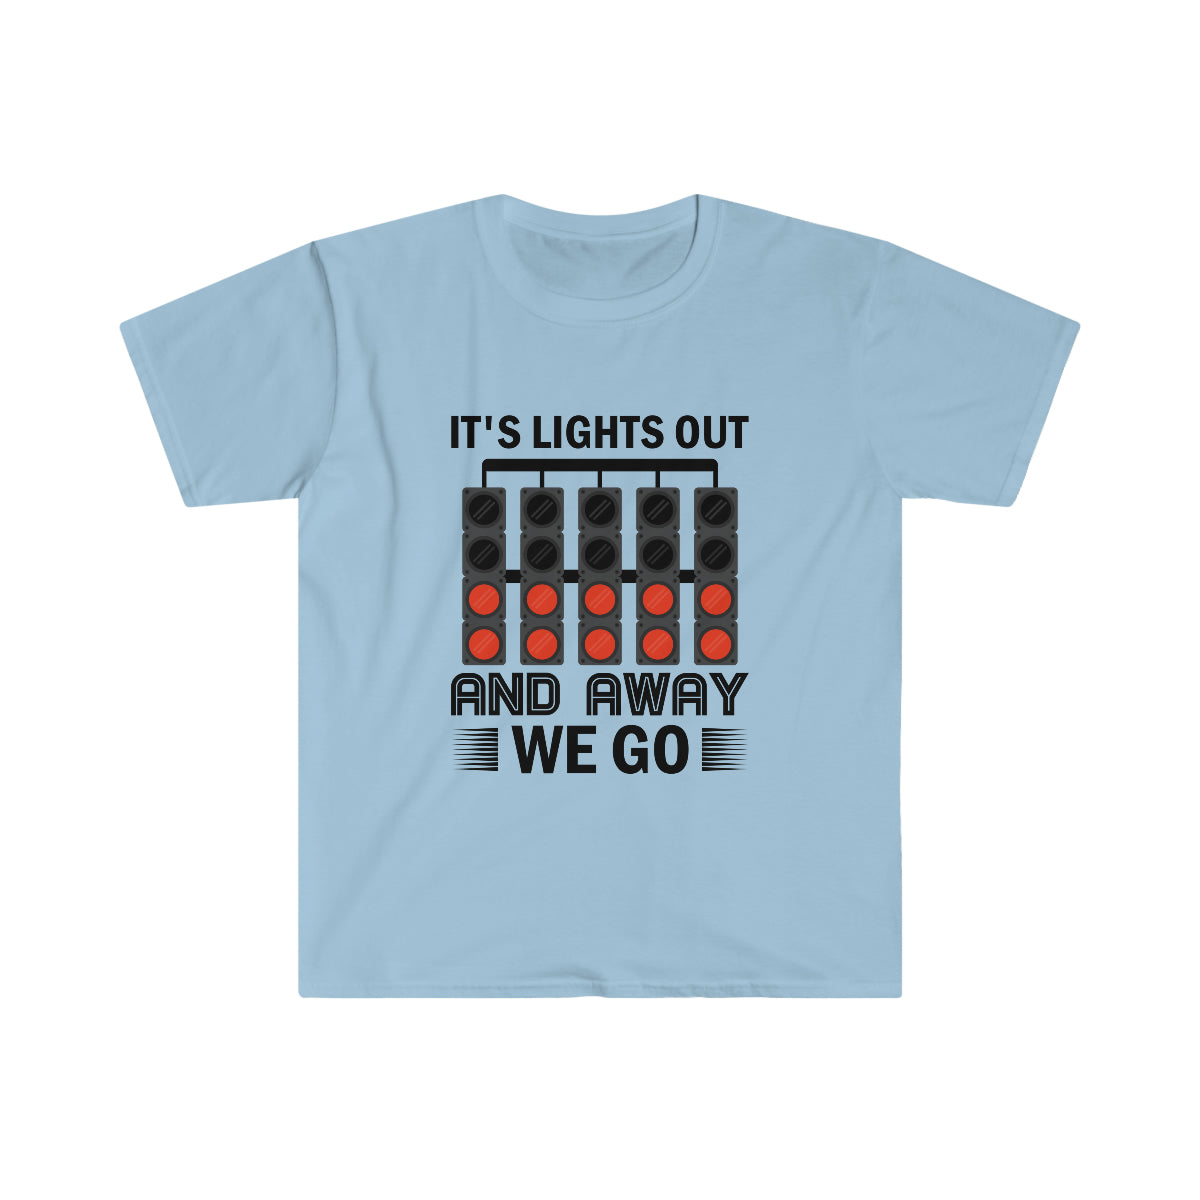 It's Lights Out and Away We Go T Shirt - Formula 1 T-Shirt - F1